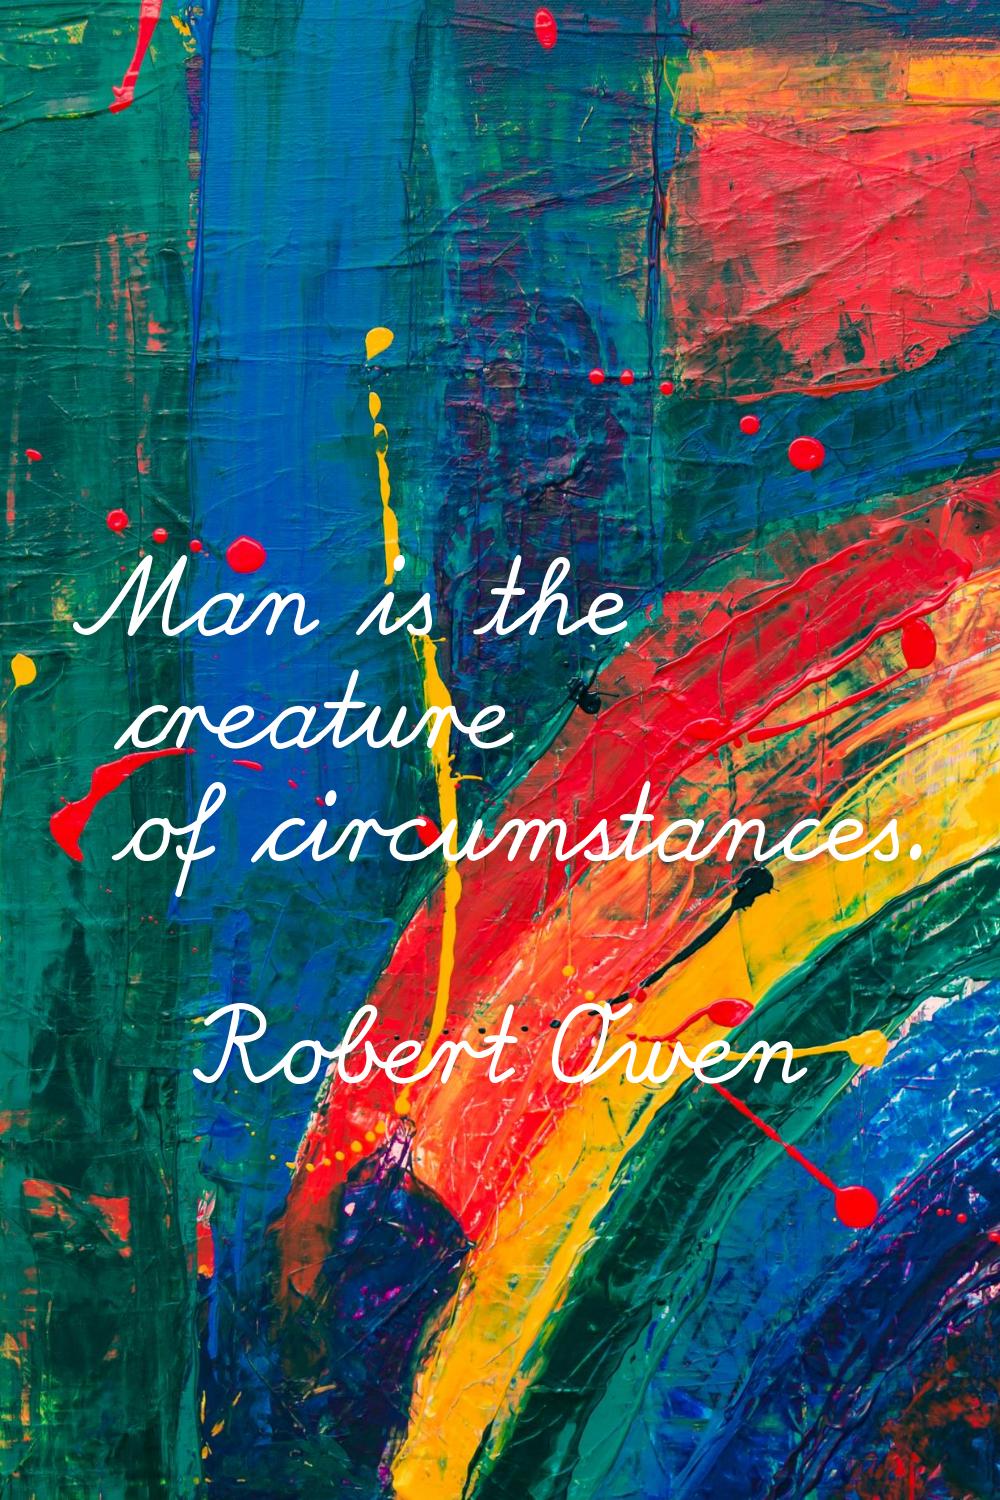 Man is the creature of circumstances.